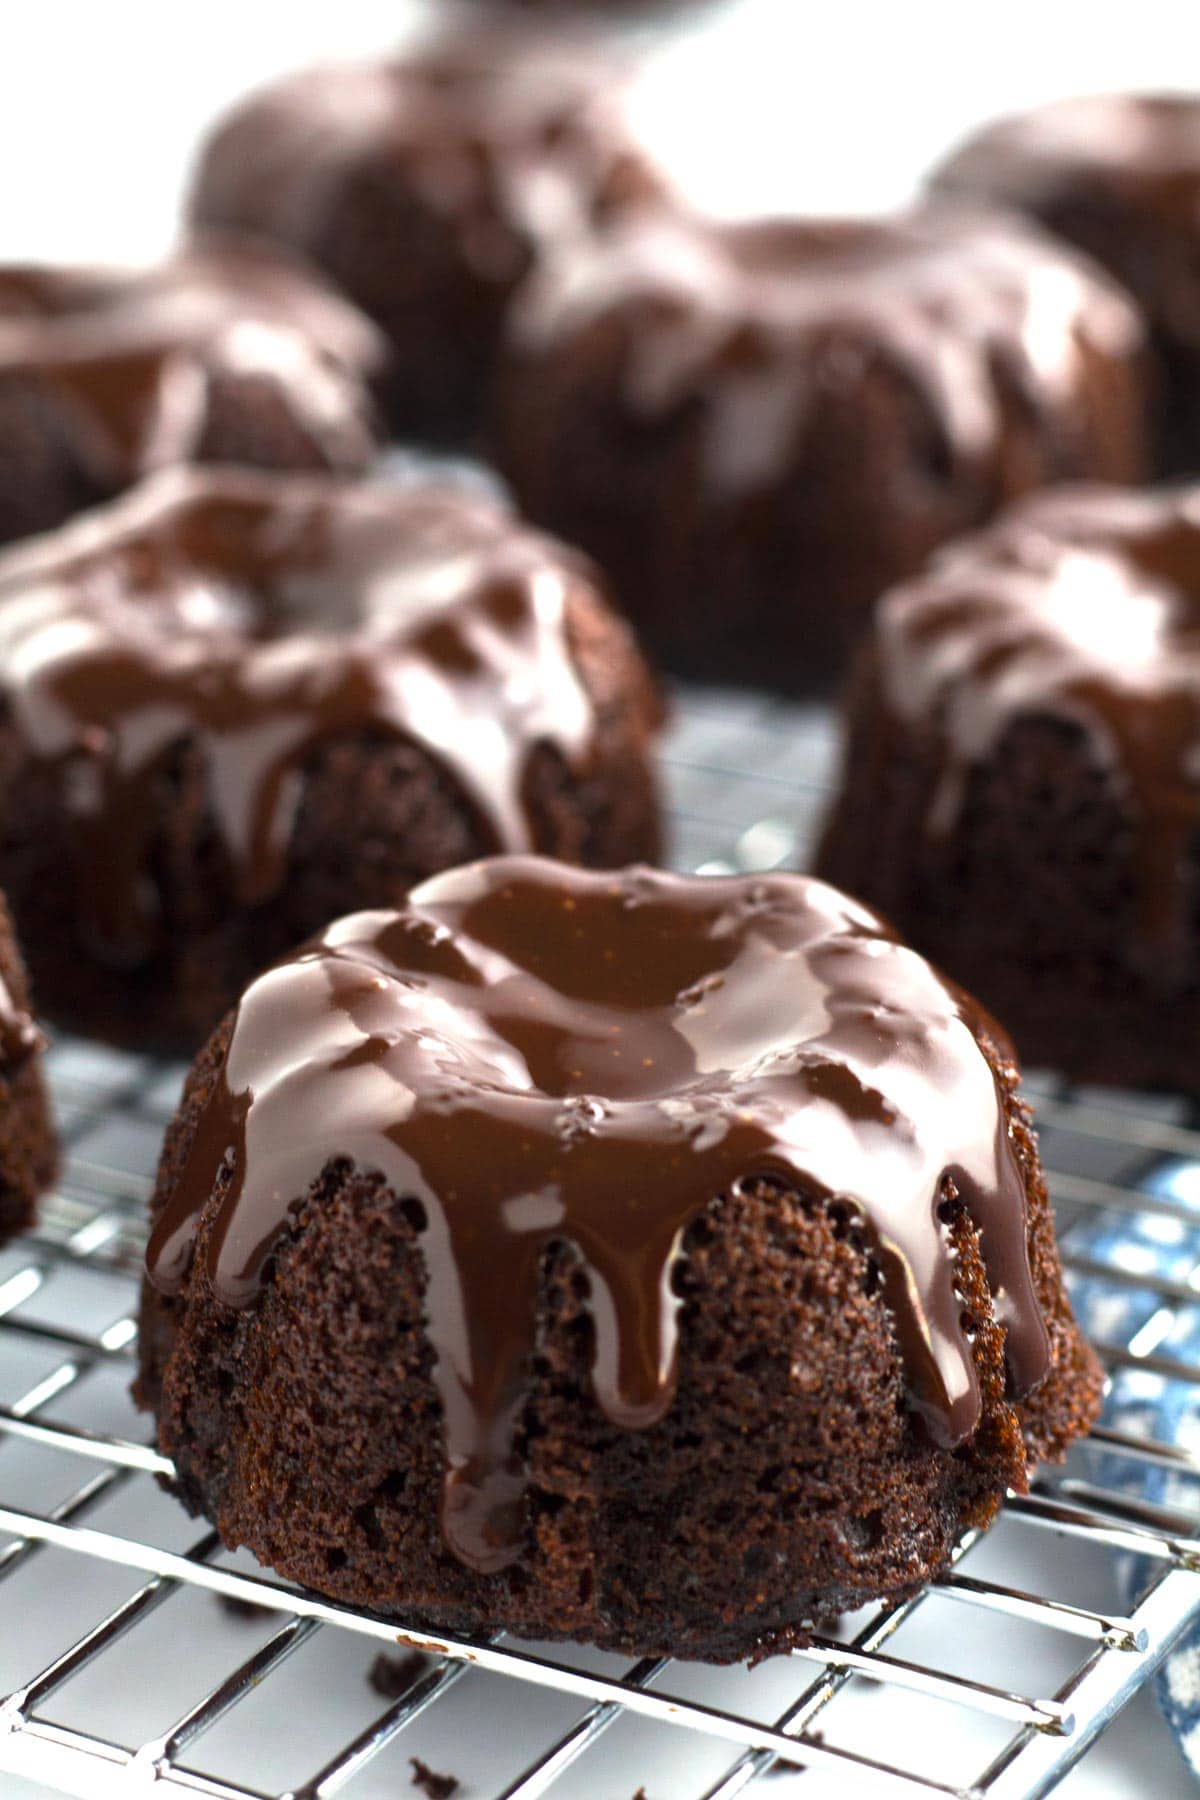 Mini Bundt Cakes decorated with chocolate ganache on cooling rack.